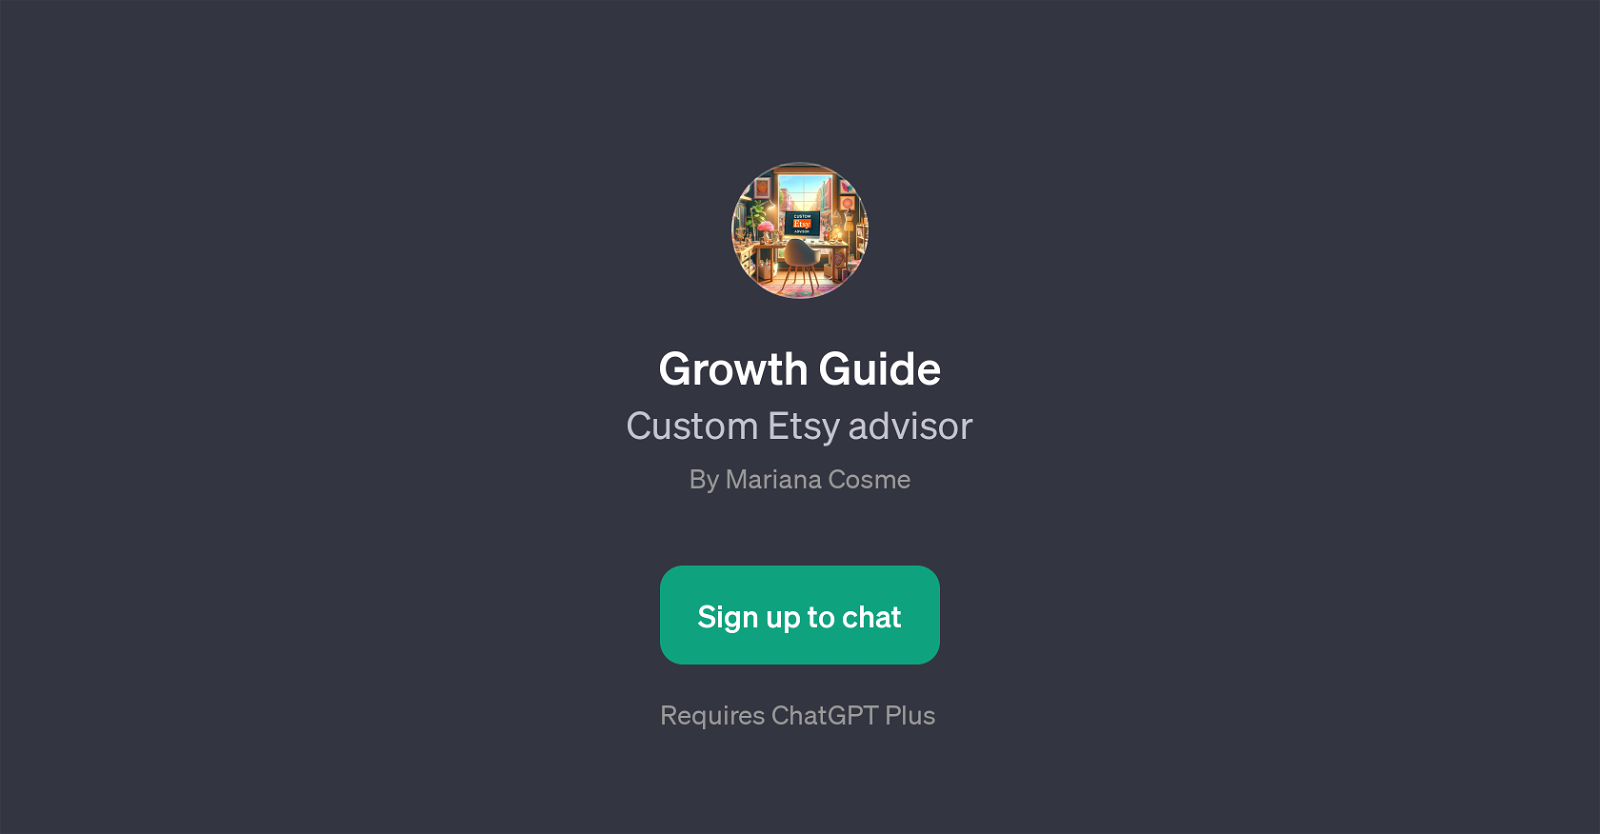 Growth Guide website